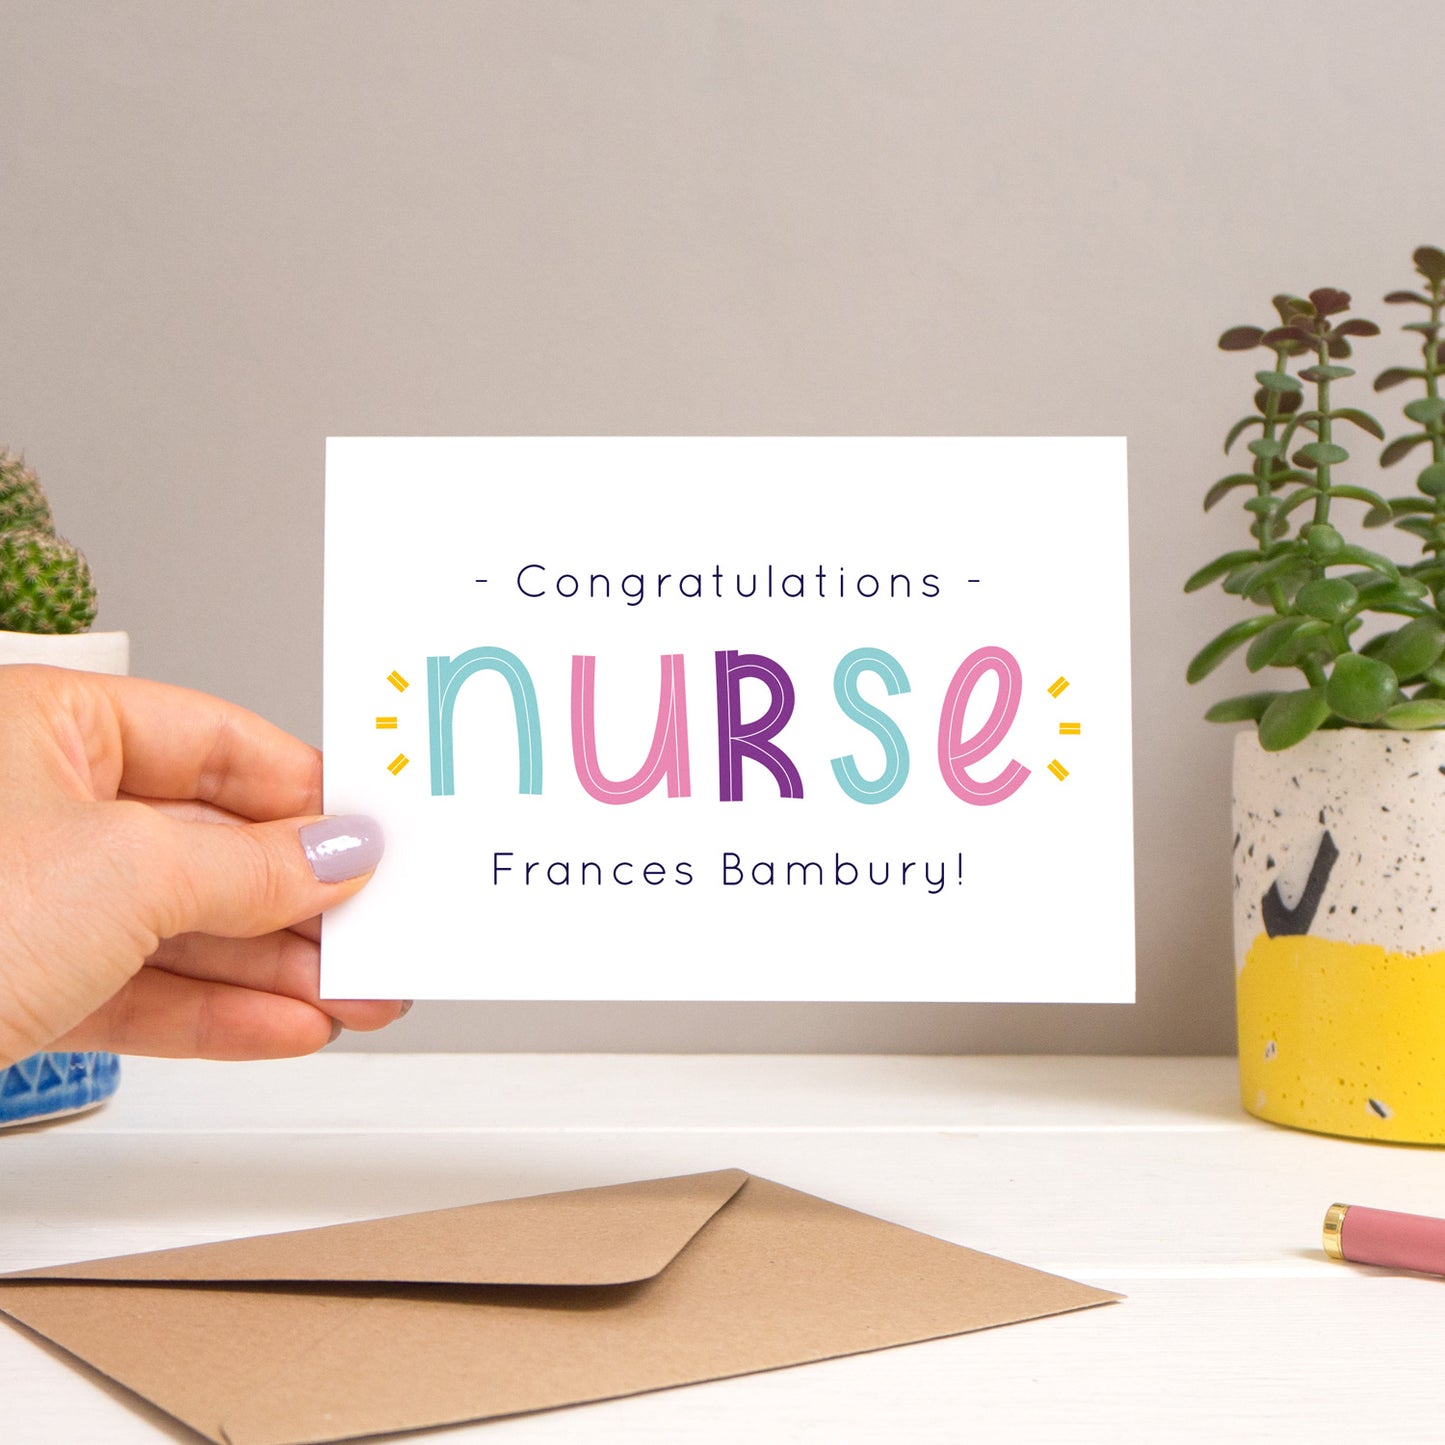 A personalised nurse card held over a warm grey and white background with potted plants peeping the sides. Behind the card is a kraft brown envelope that comes with the card. The text on this version of the card is in varying tones of navy and pink, purple and blue.